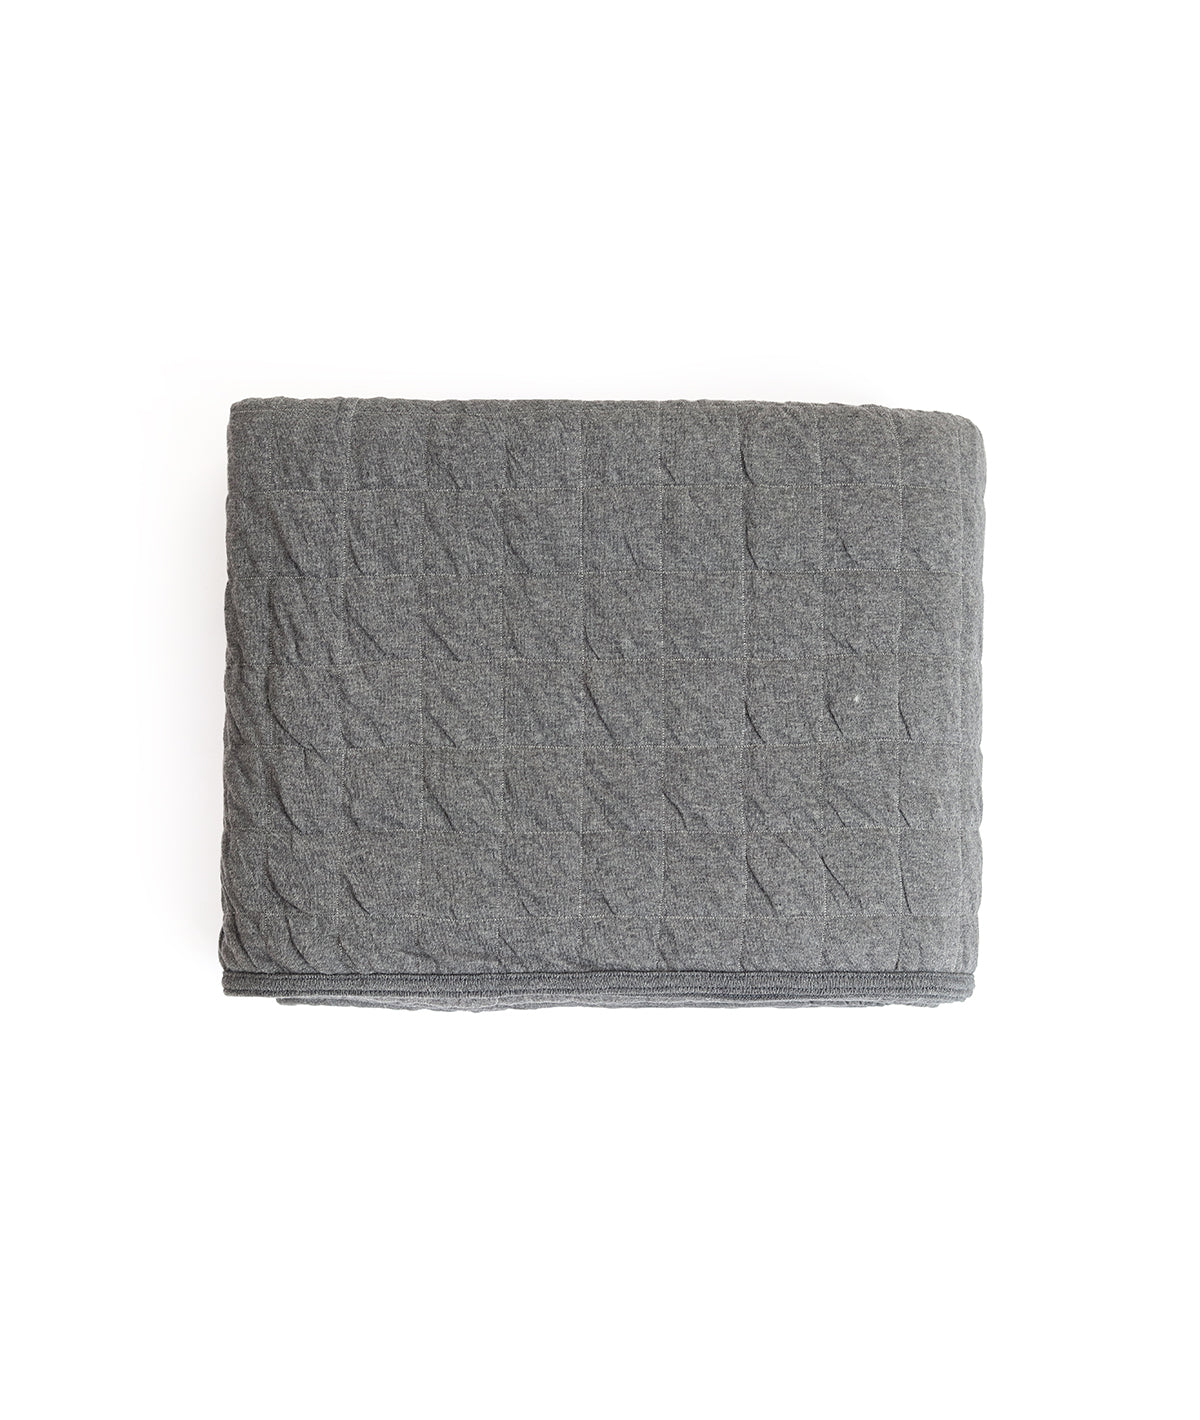 Square Check Cotton Knitted Light weight Quilted Blanket (Dark Grey )